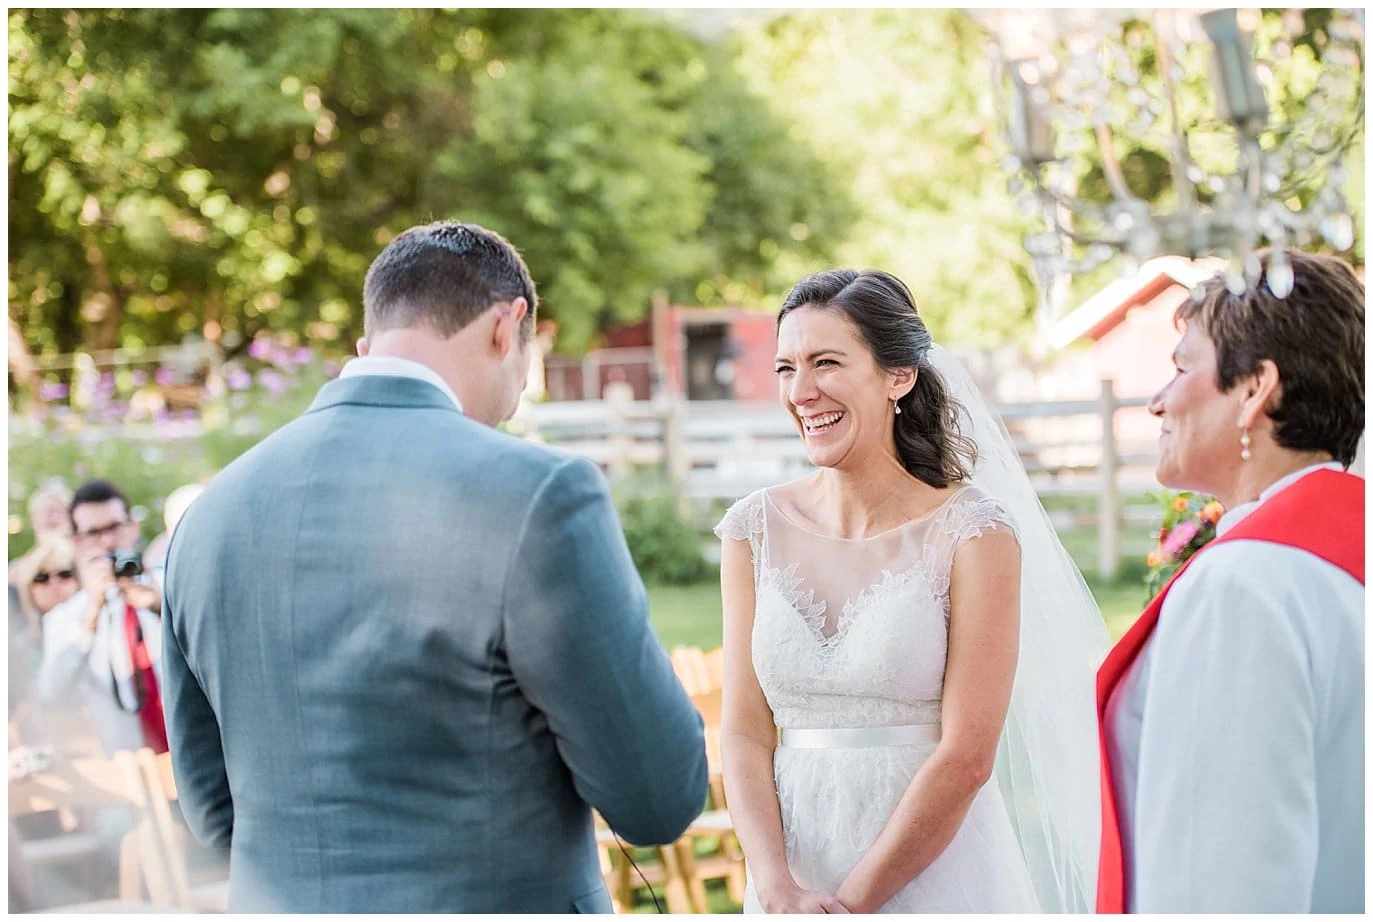 vows during outdoor intimate Colorado wedding at Lyons Farmette wedding by Lyons Wedding Photographer Jennie Crate